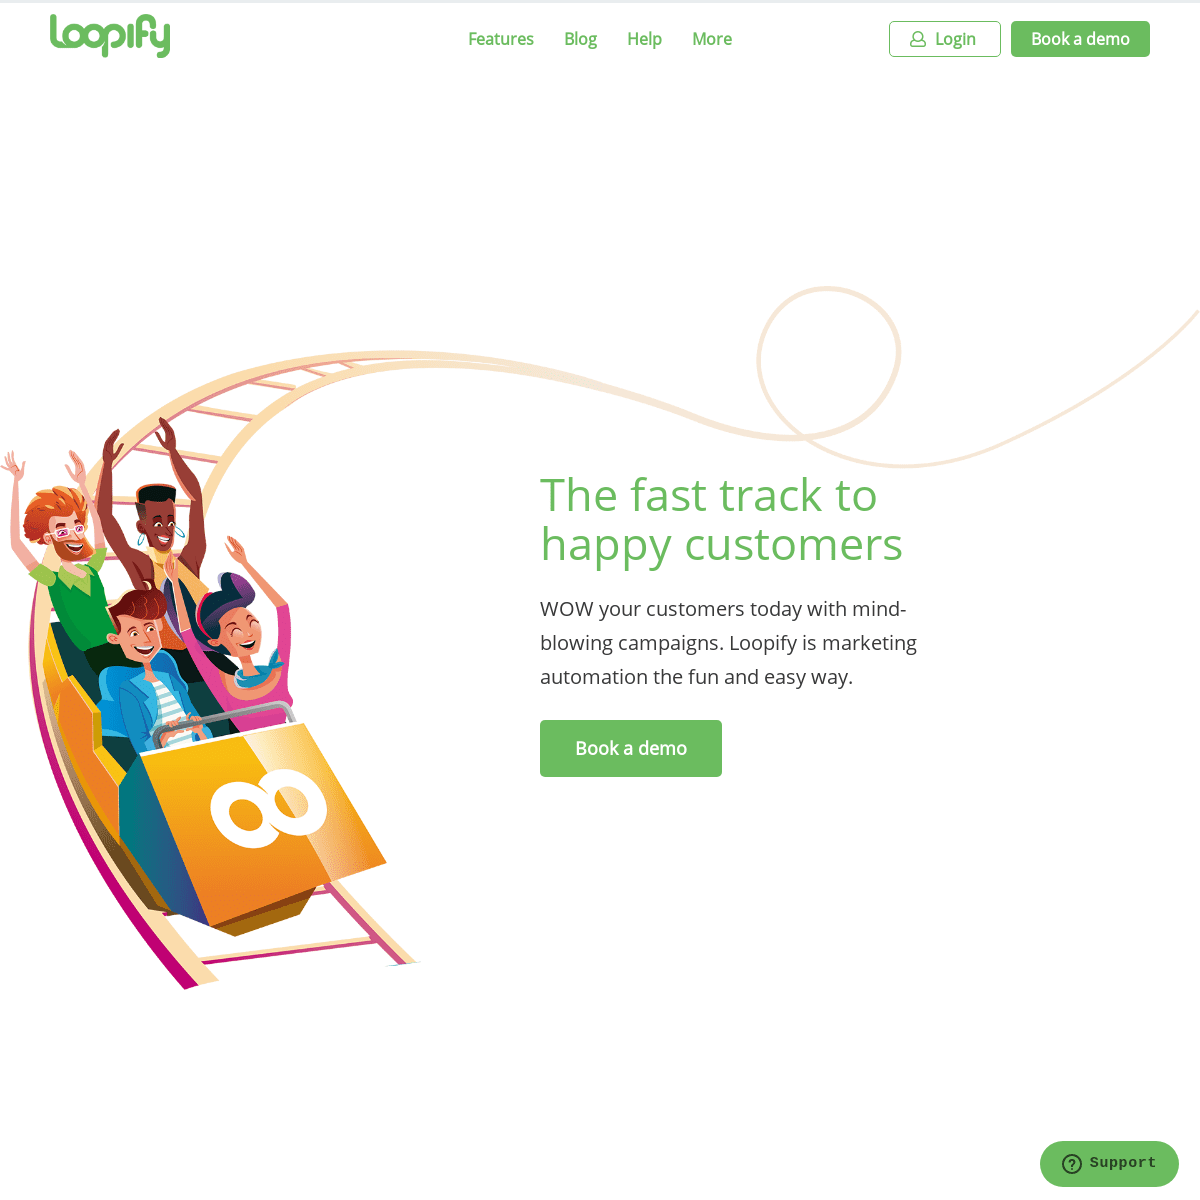 Loopify - The Fast Track to Happy Customers!